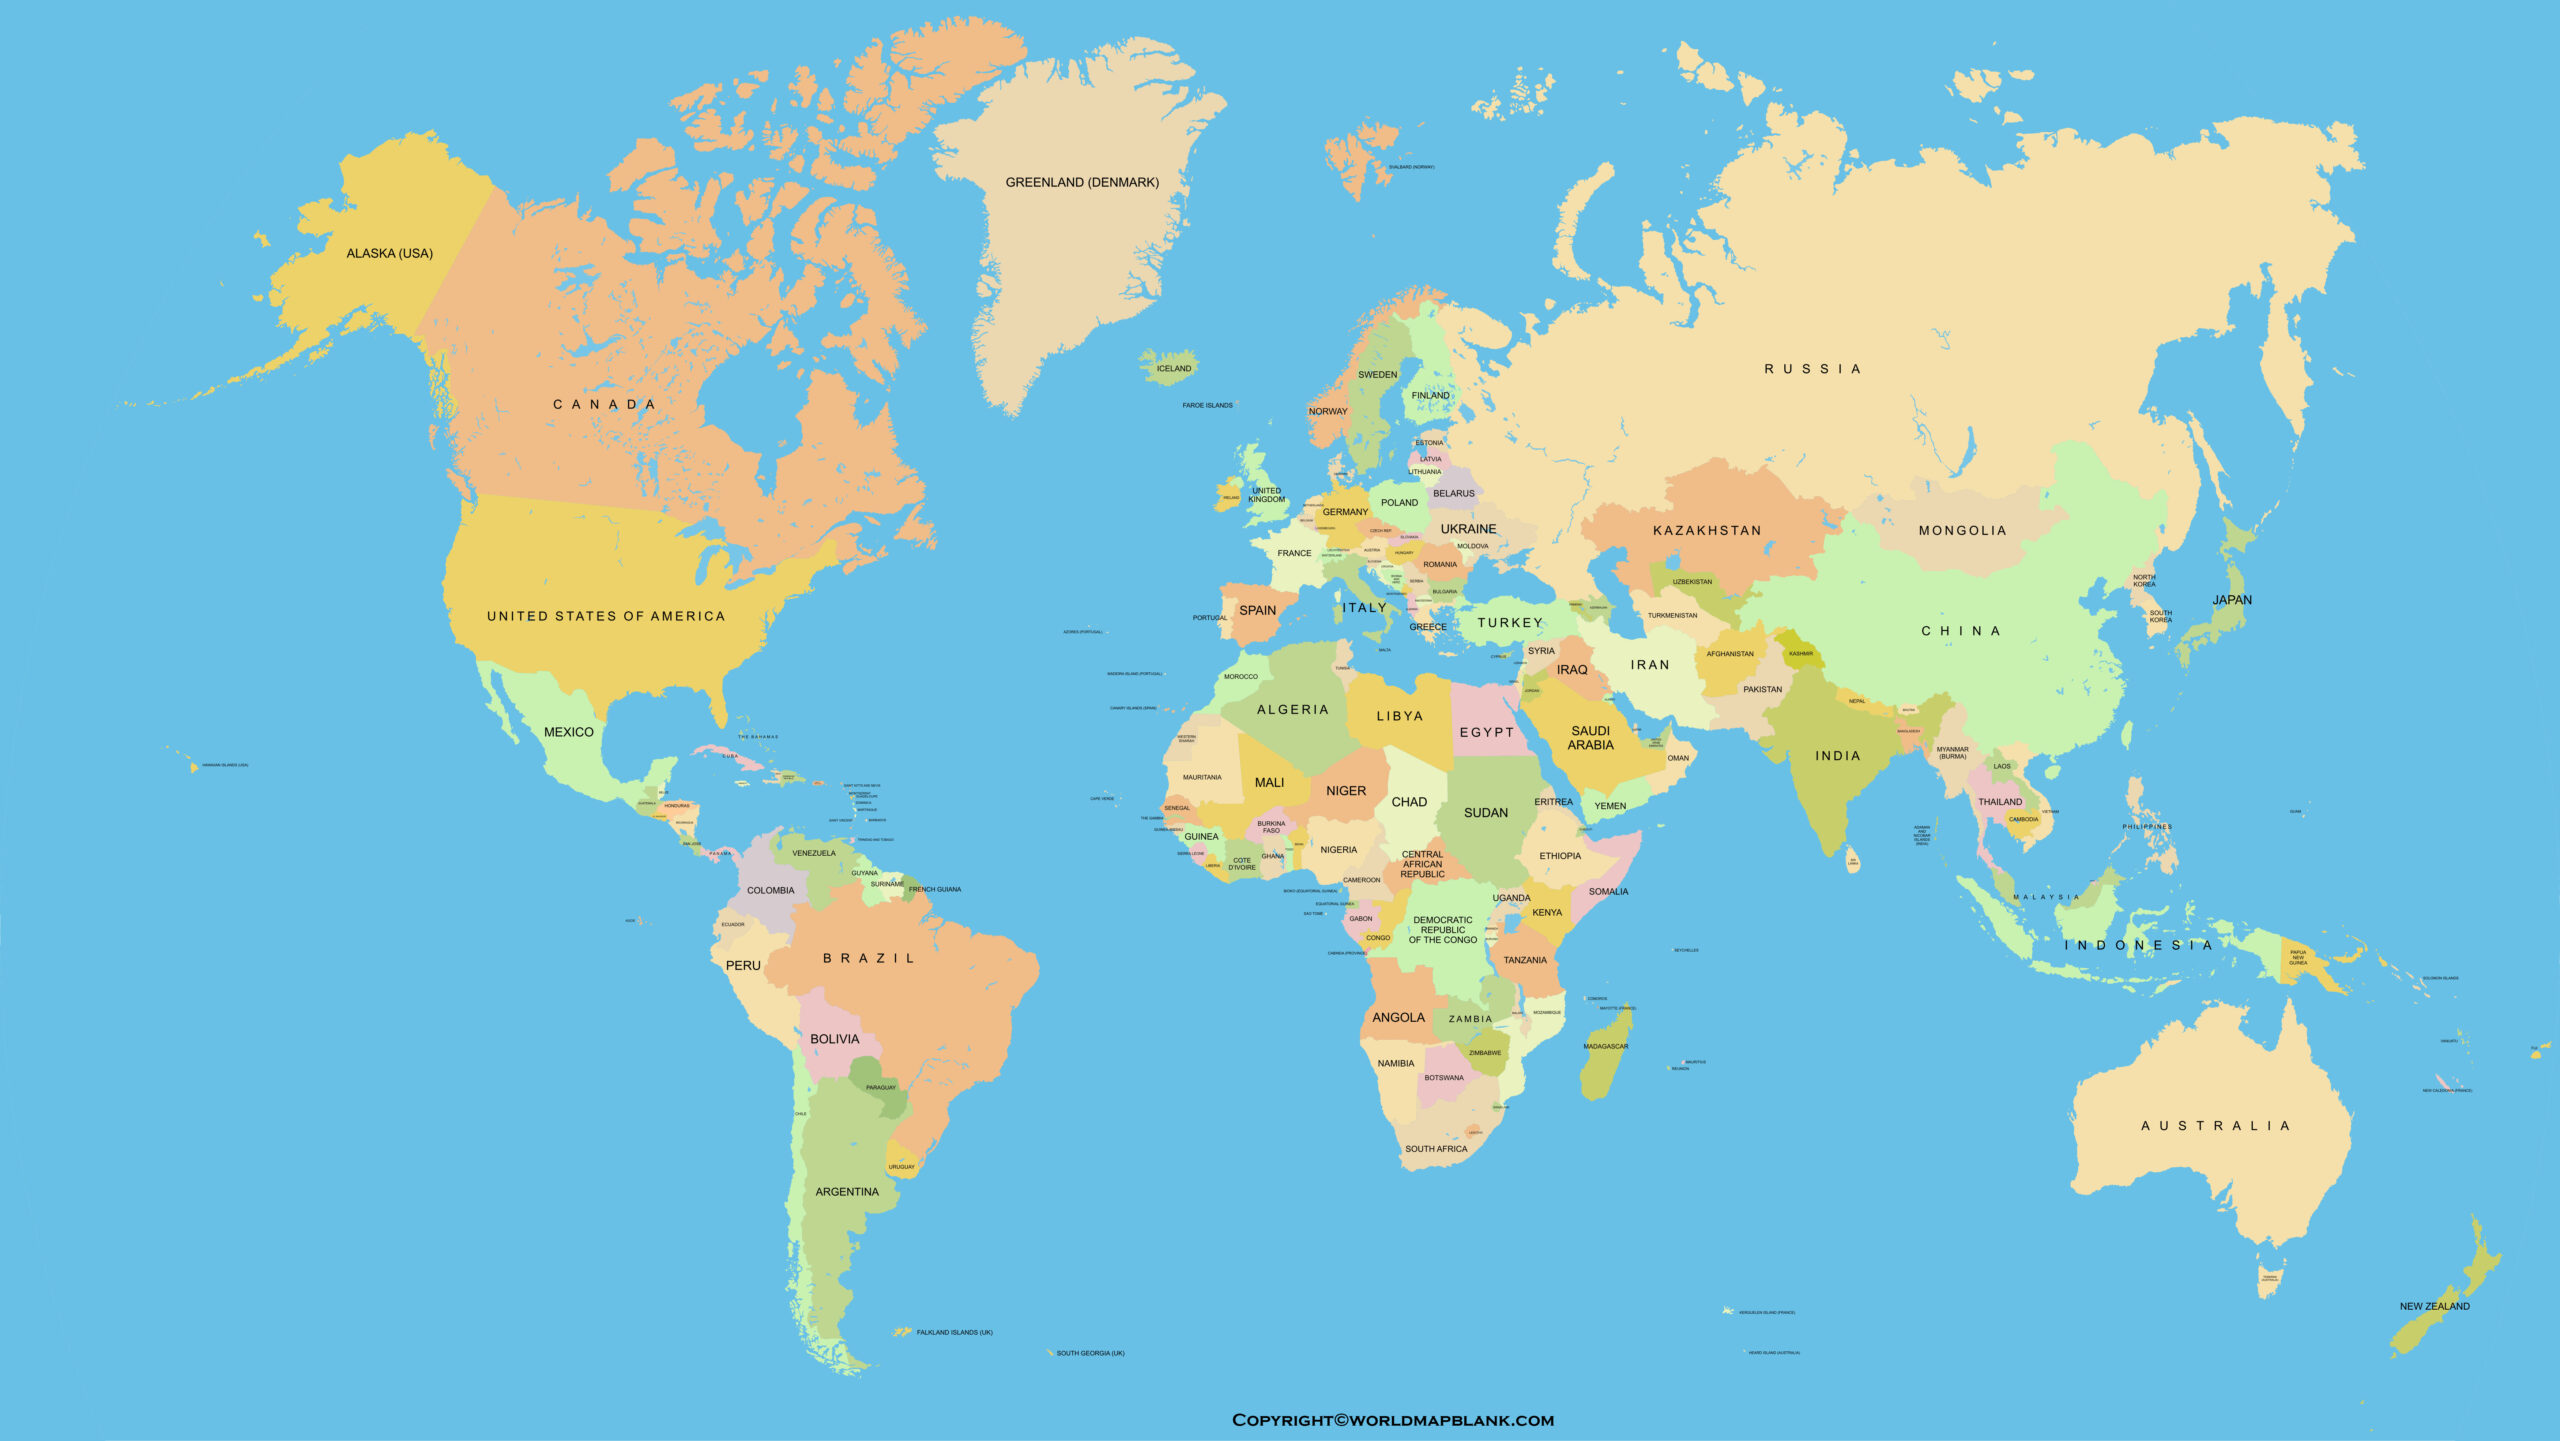 Most Accurate Map of the World